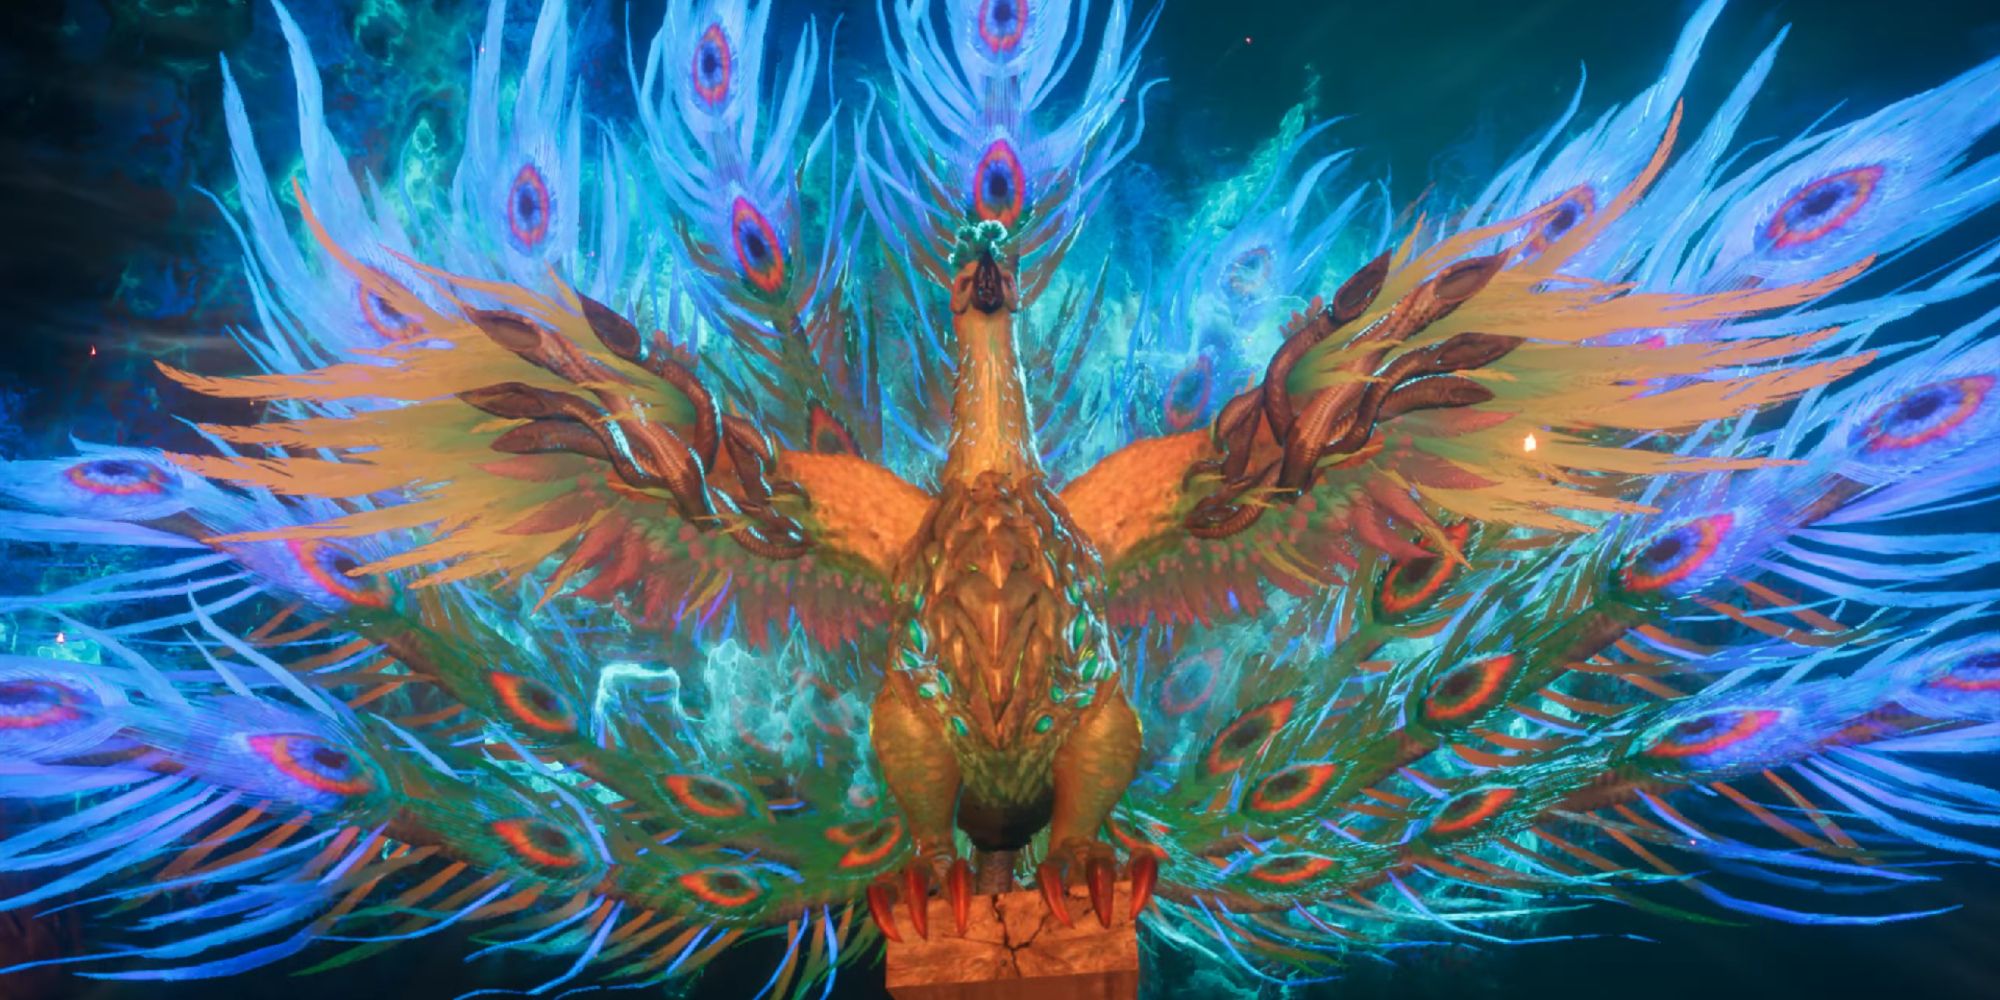 An Emberplume kemono scattering its peacock feathers that it caught in blue flames during a cutscene in Wild Hearts.